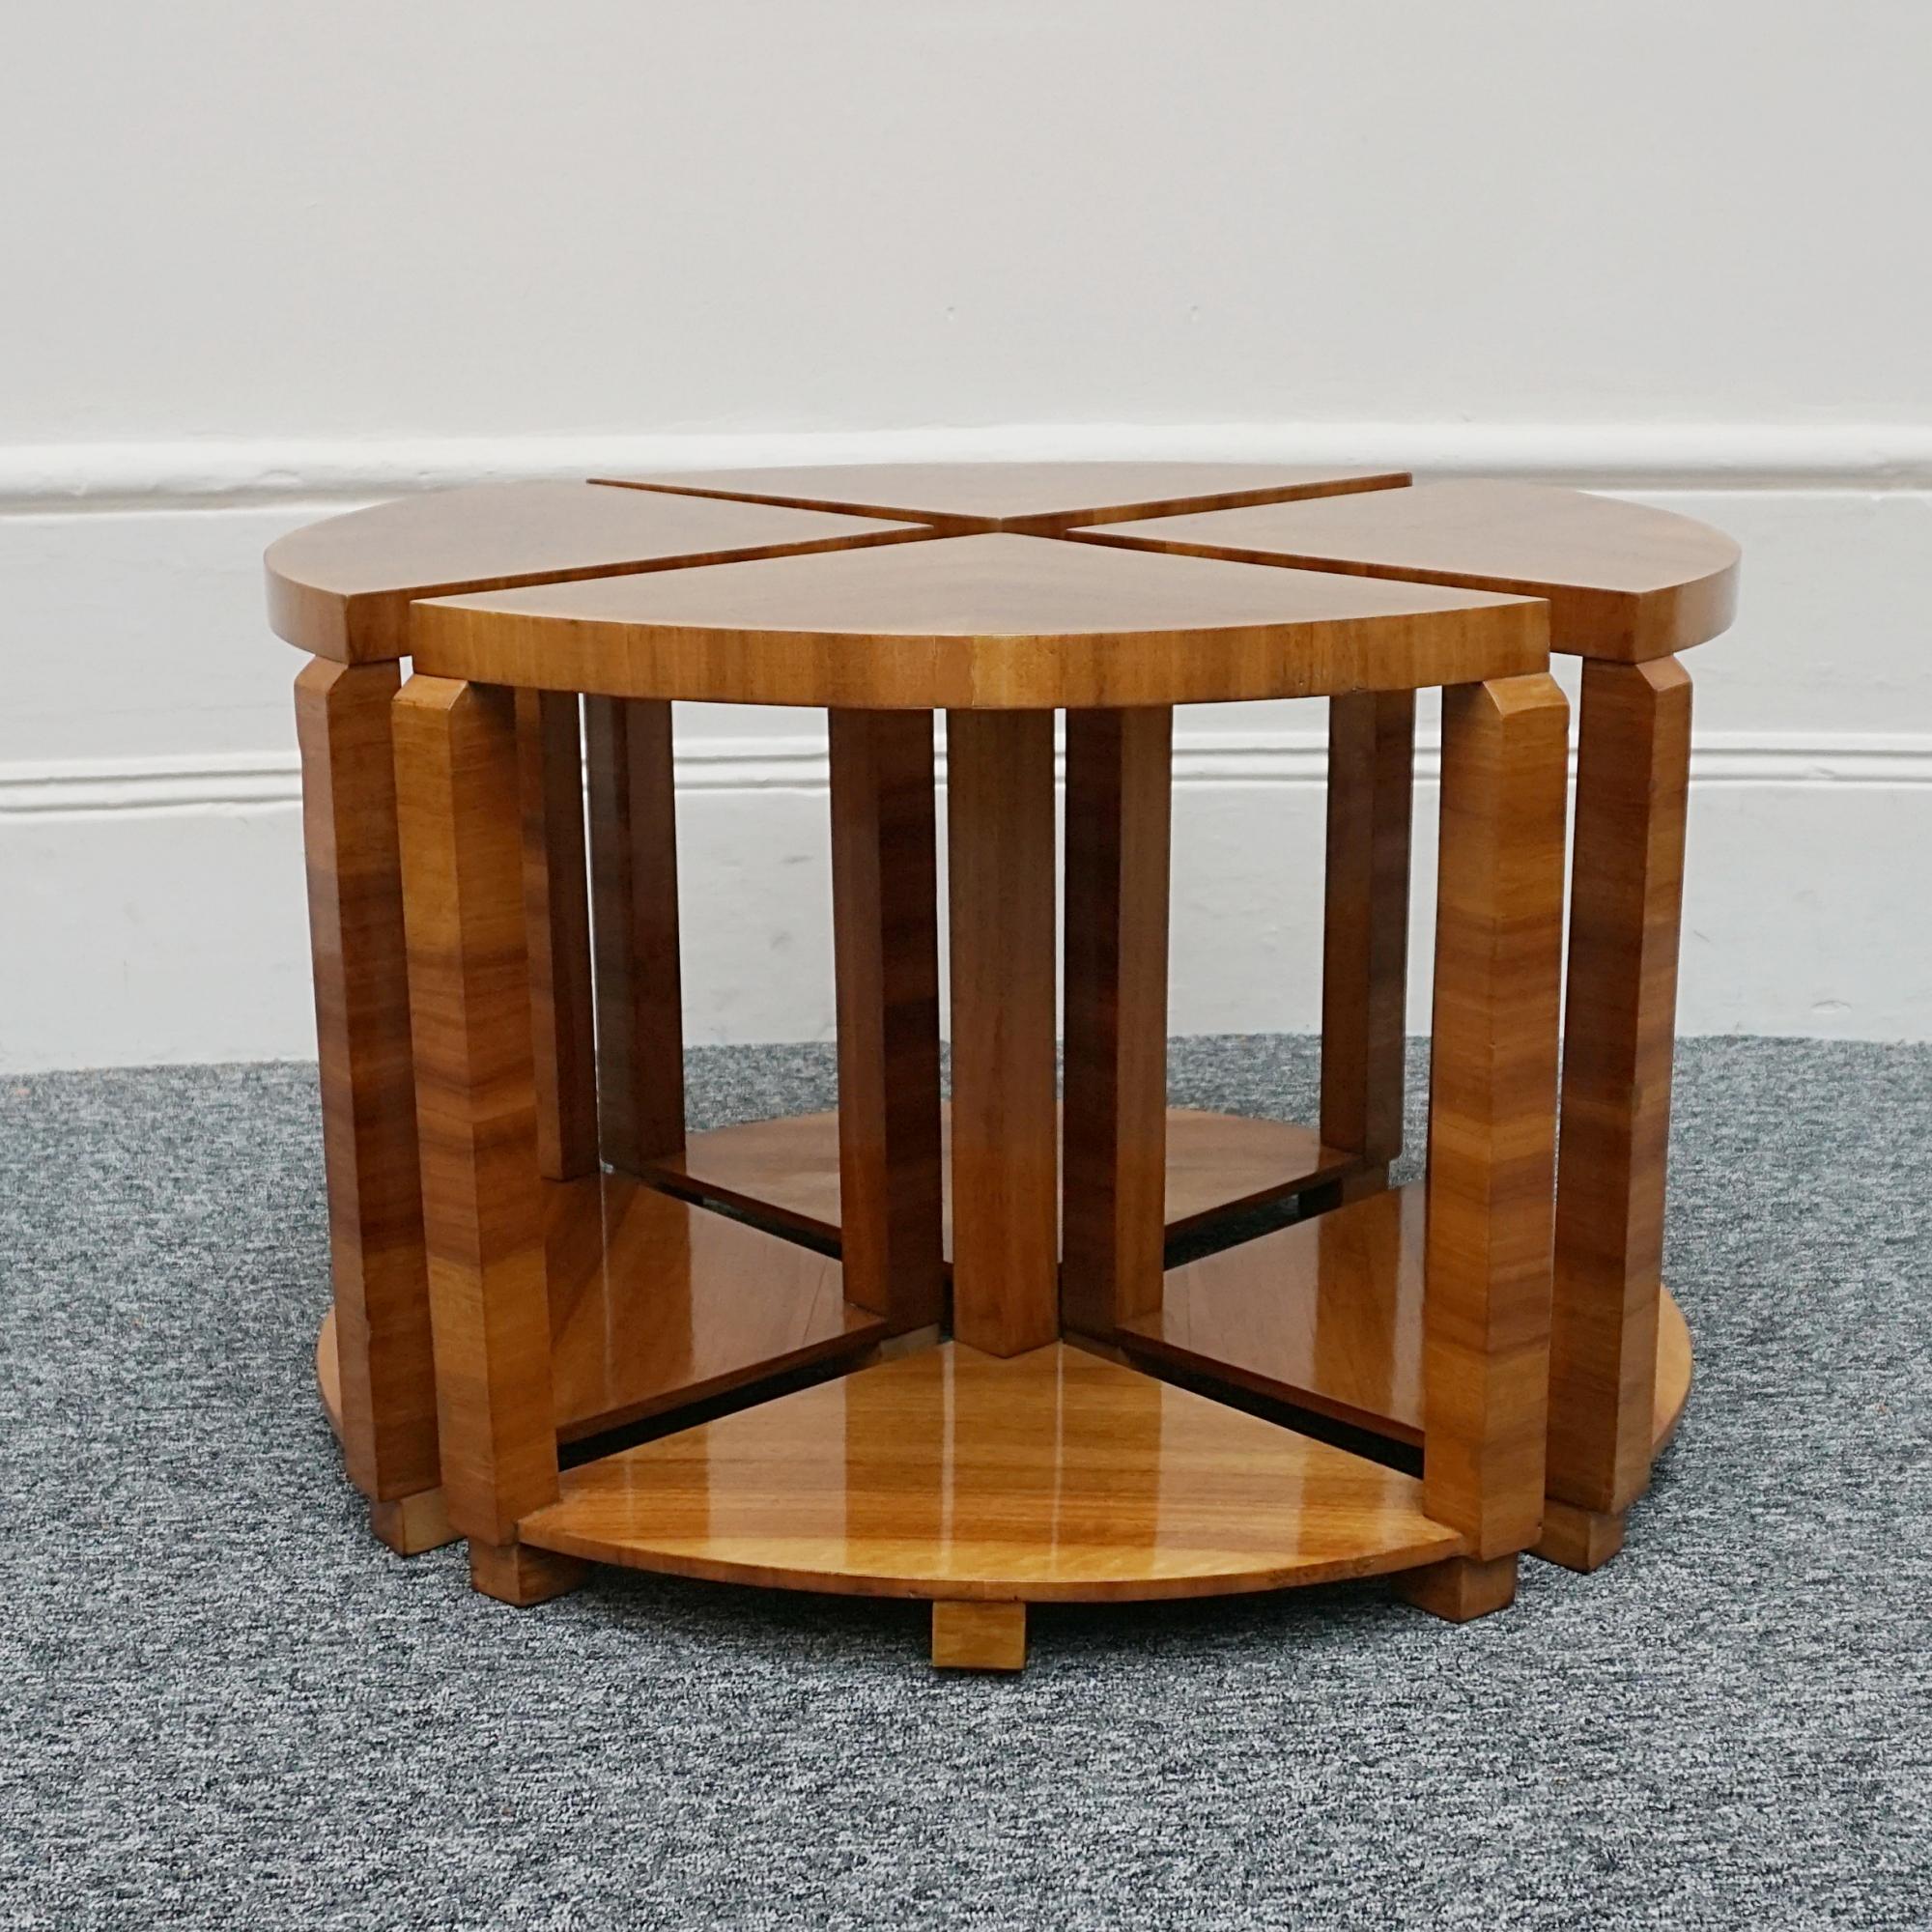 An Art Deco nest of tables. Figured walnut throughout with four pull out side tables and circular glass top (not pictured). 

Dimensions: H 51cm W/D: 76cm

Origin:  English

Date: Circa 1935

Item Number: 1011230

All of our furniture is extensively